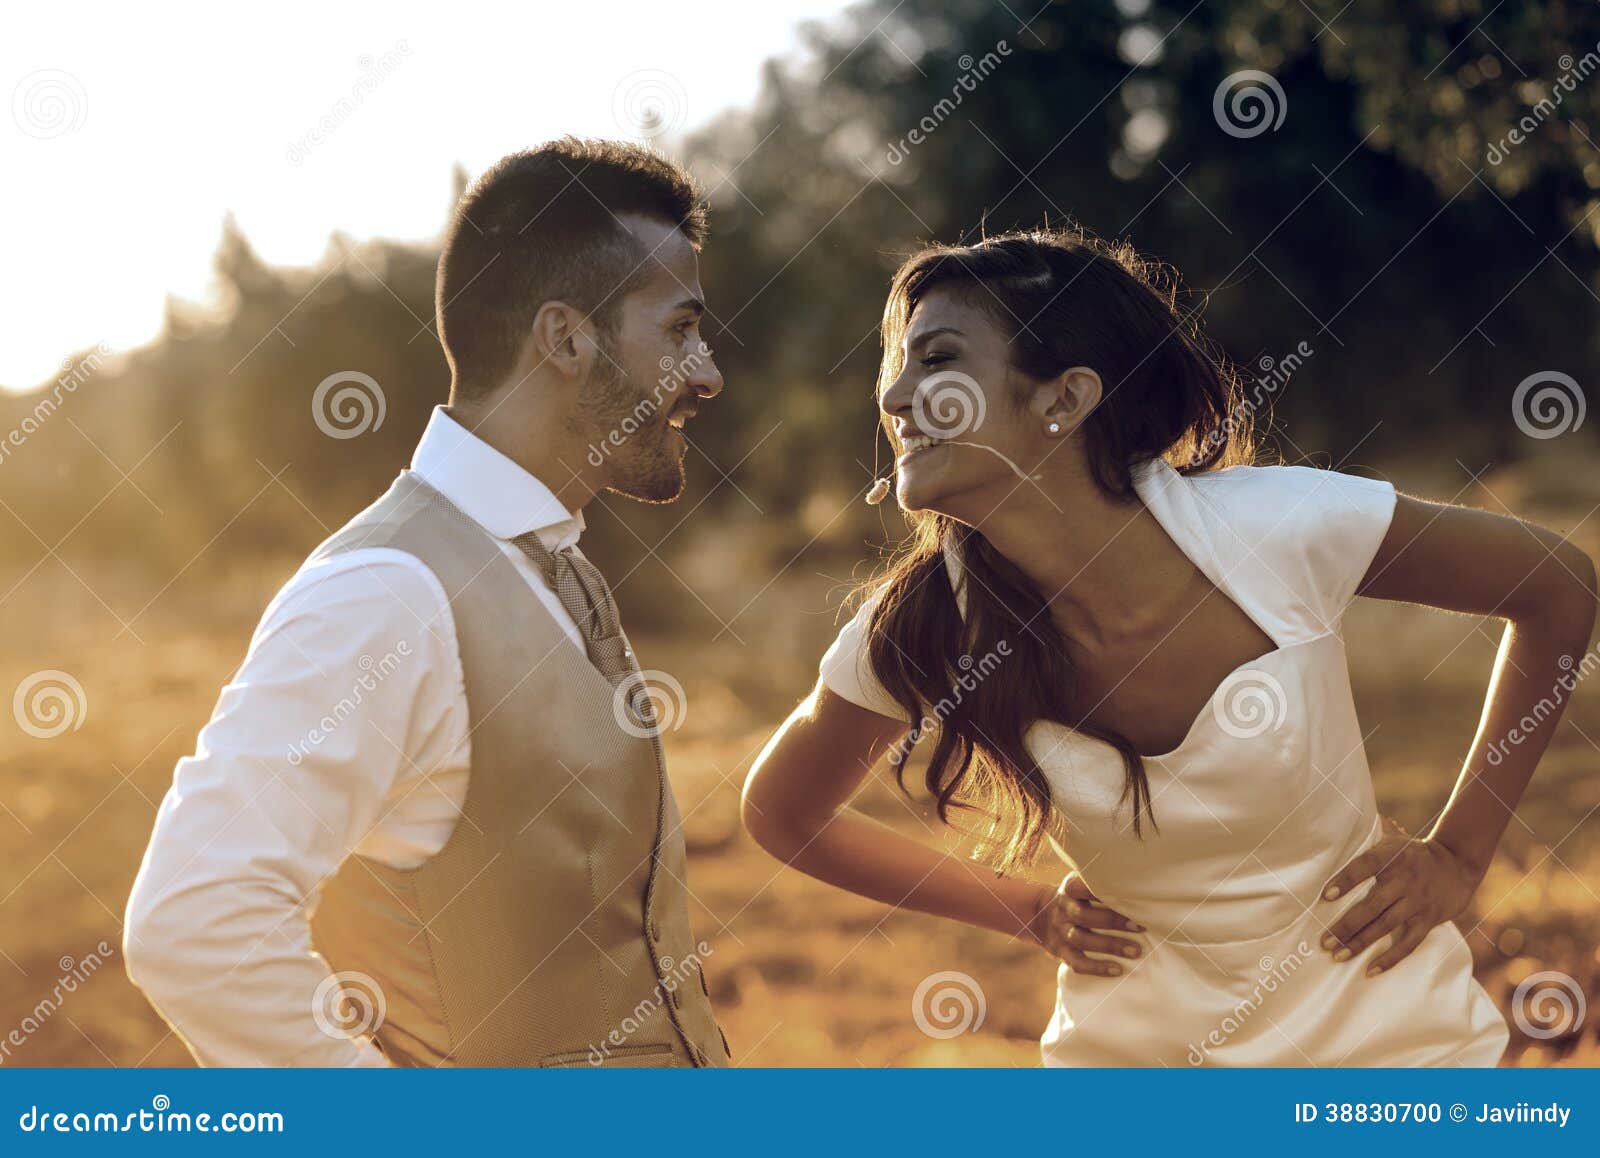 Just Married Couple In Nature Background Stock Photo - Image: 38830700